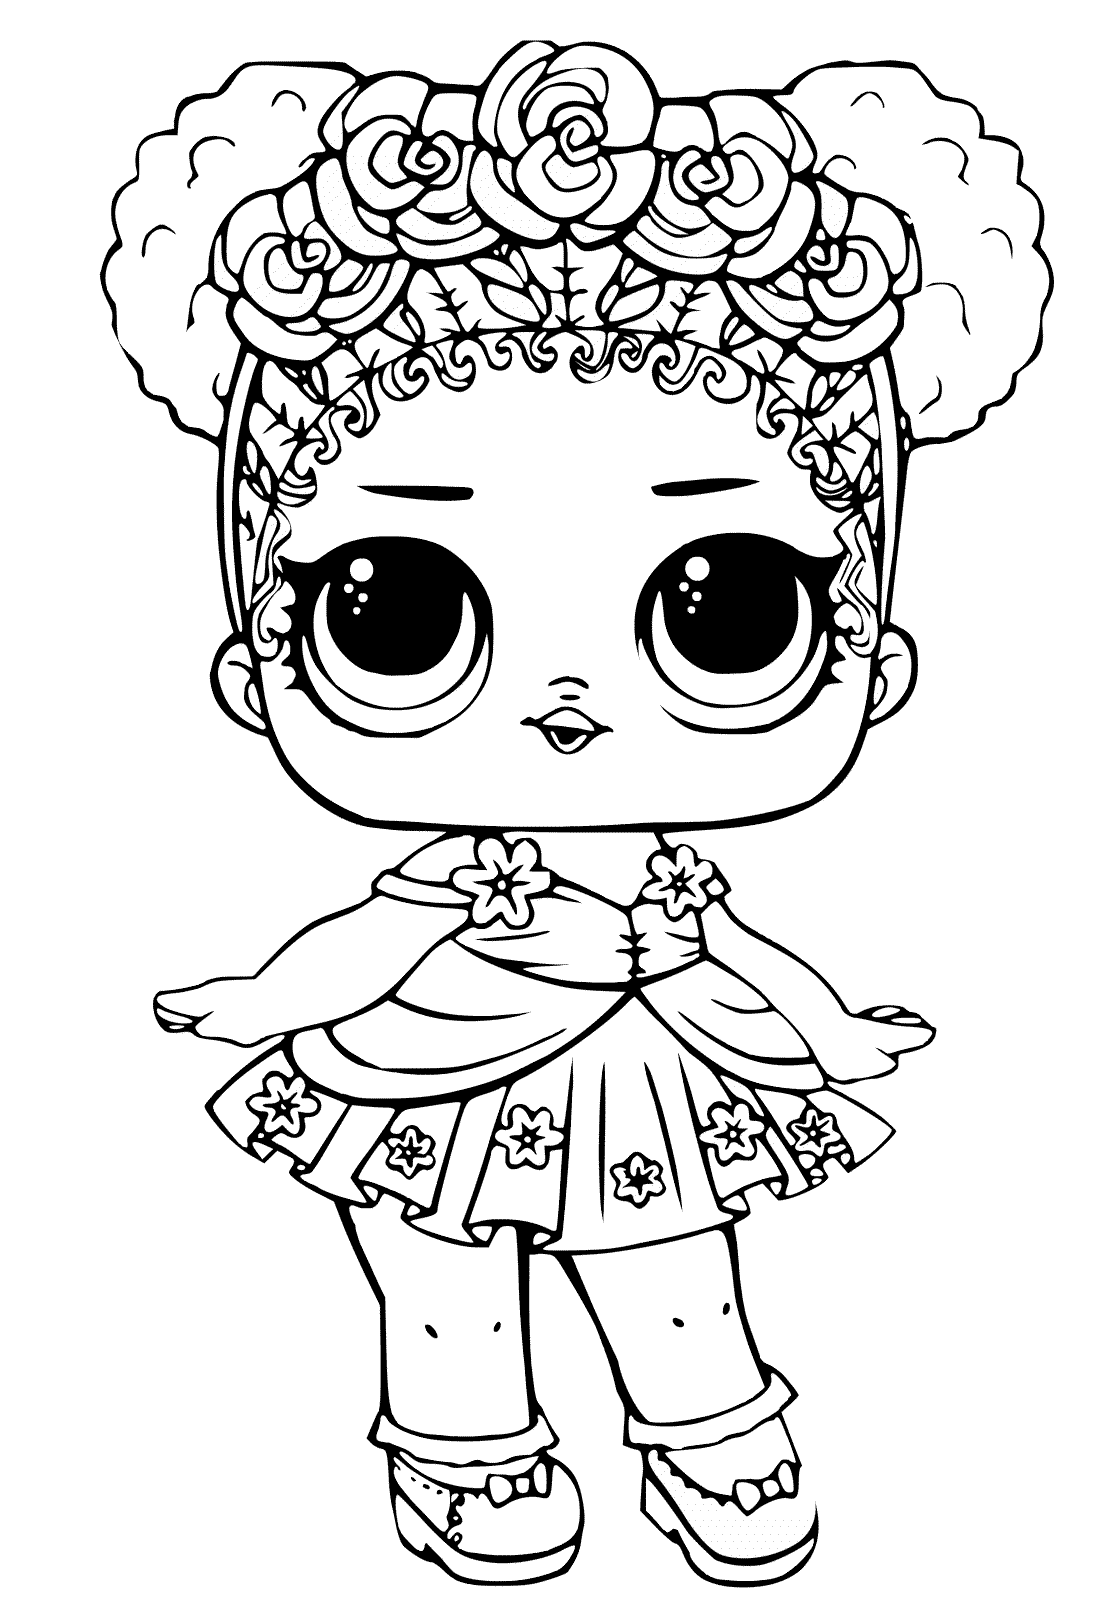 Free Printable Lol Coloring Pages For Girls  lol Coloring Pages for ...